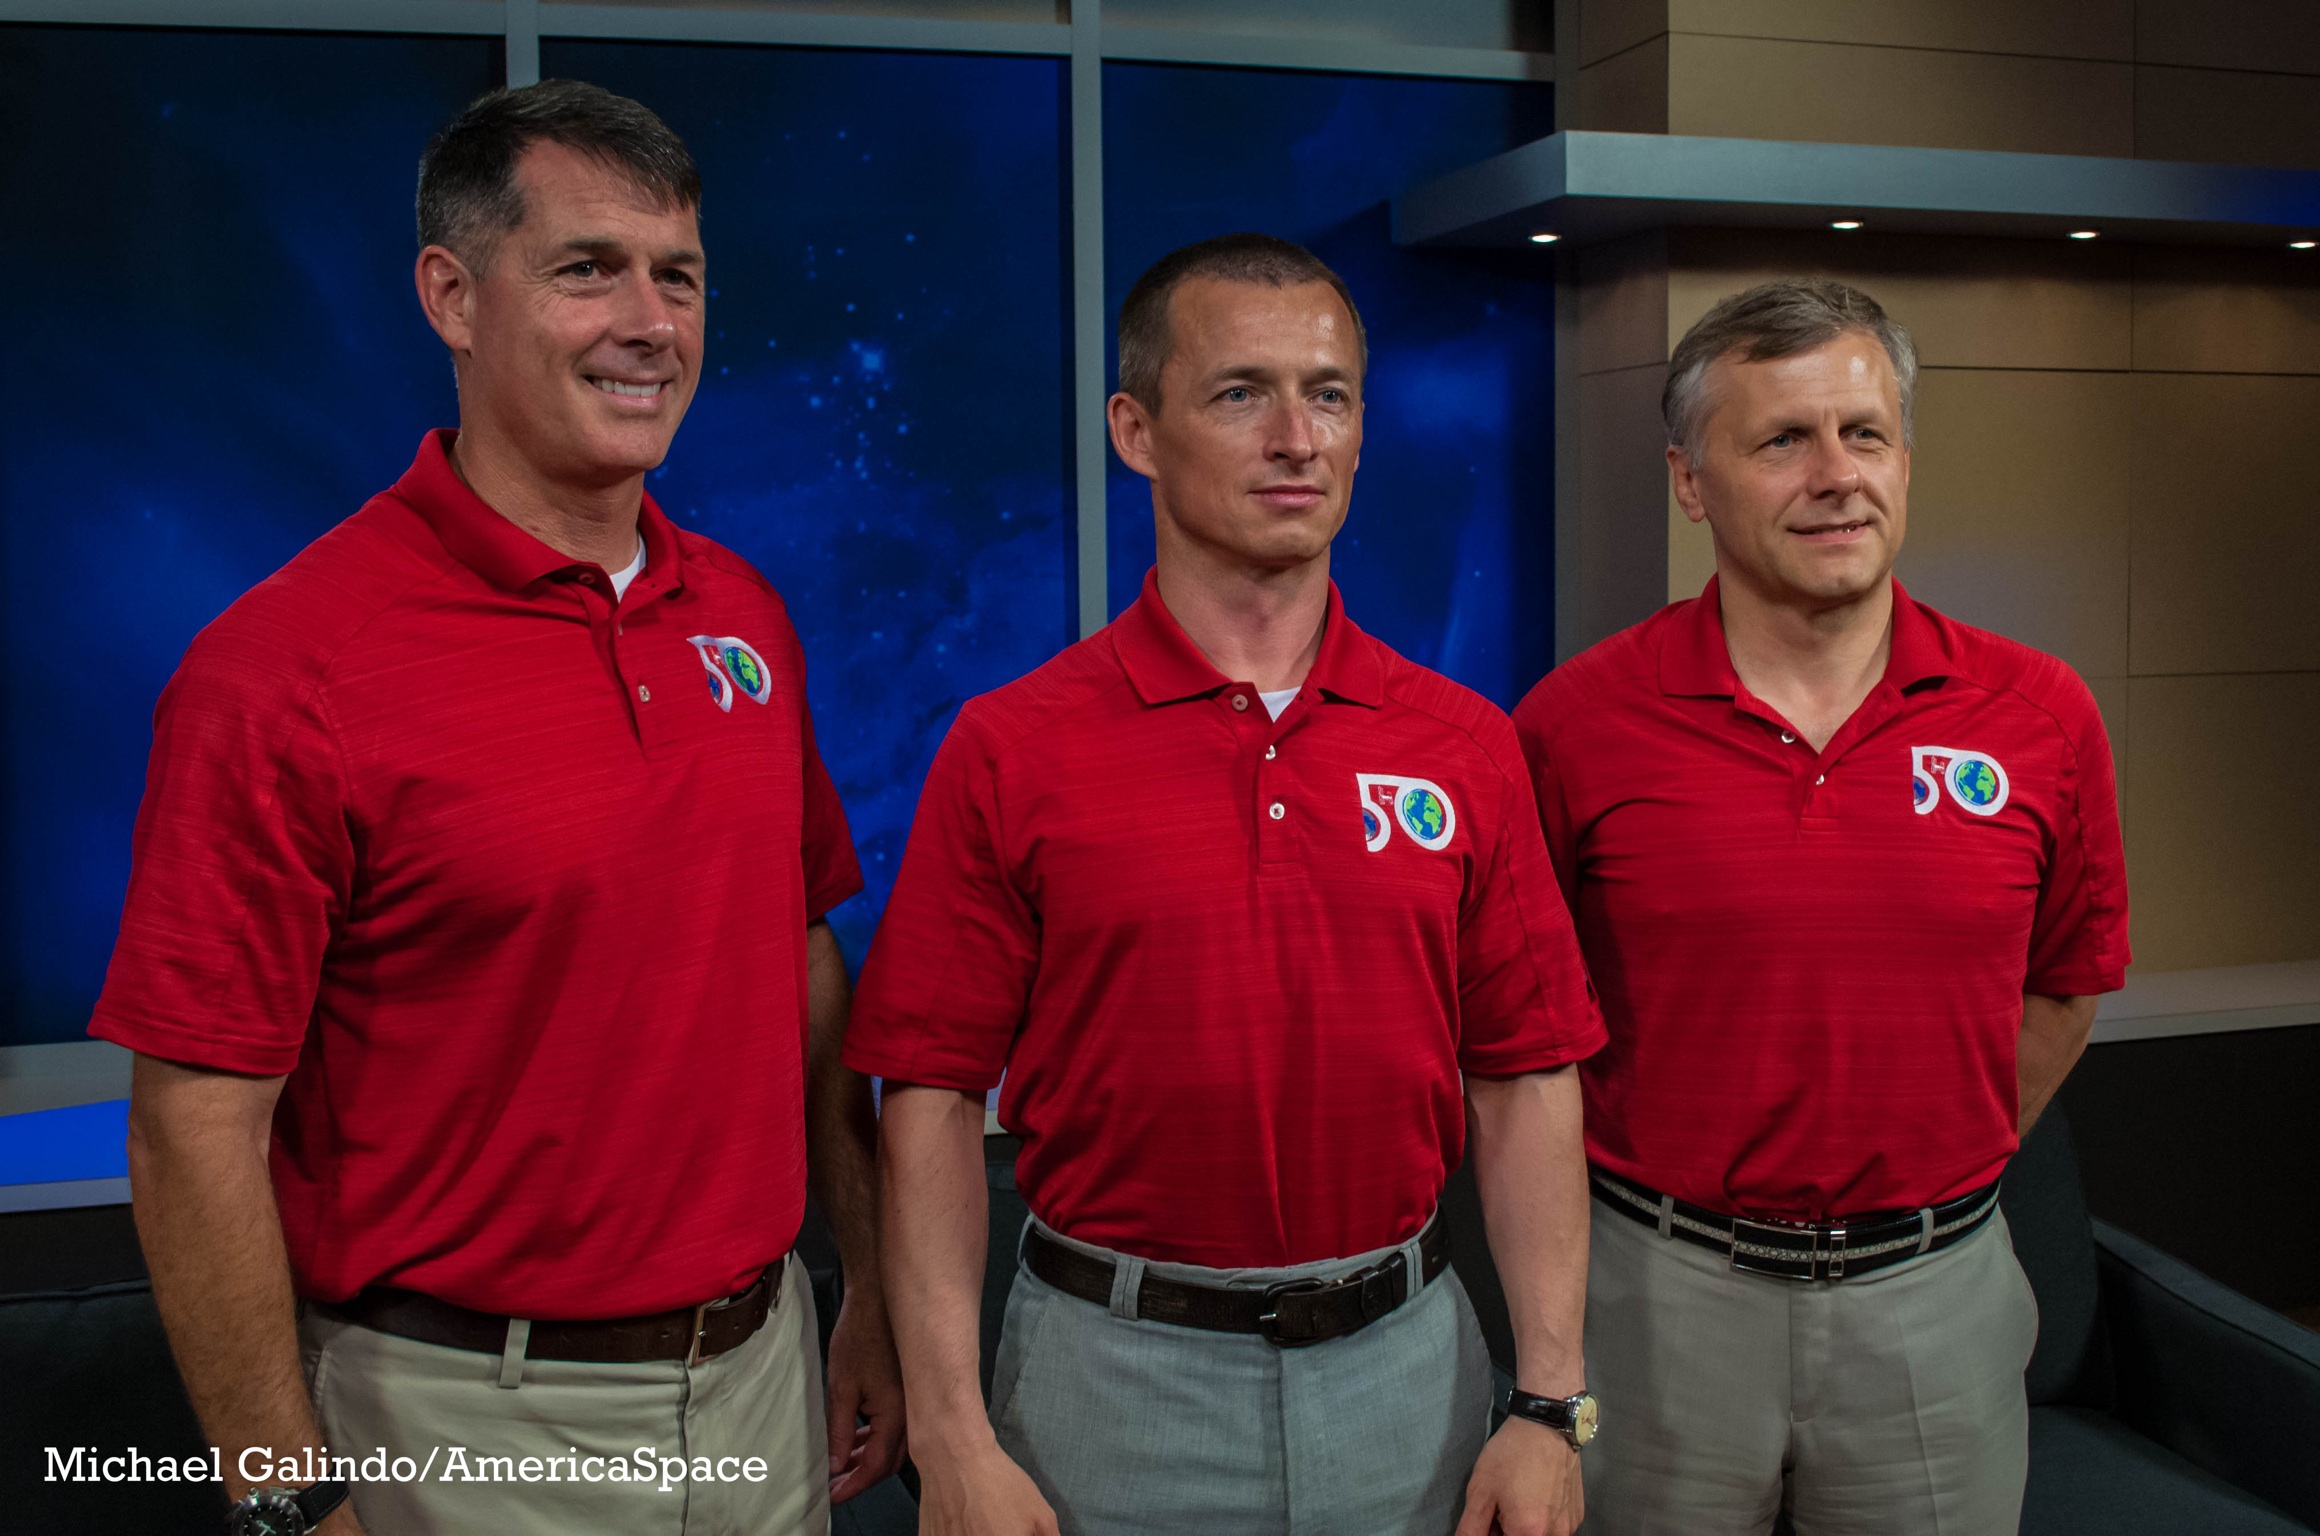 Standing in the same configuration that they will occupy in the Soyuz MS-02 spacecraft are (from left) Flight Engineer-2 Shane Kimbrough, Commander Sergei Ryzhikov and Flight Engineer-1 Andrei Borisenko. Photo Credit: Michael Galindo/AmericaSpace